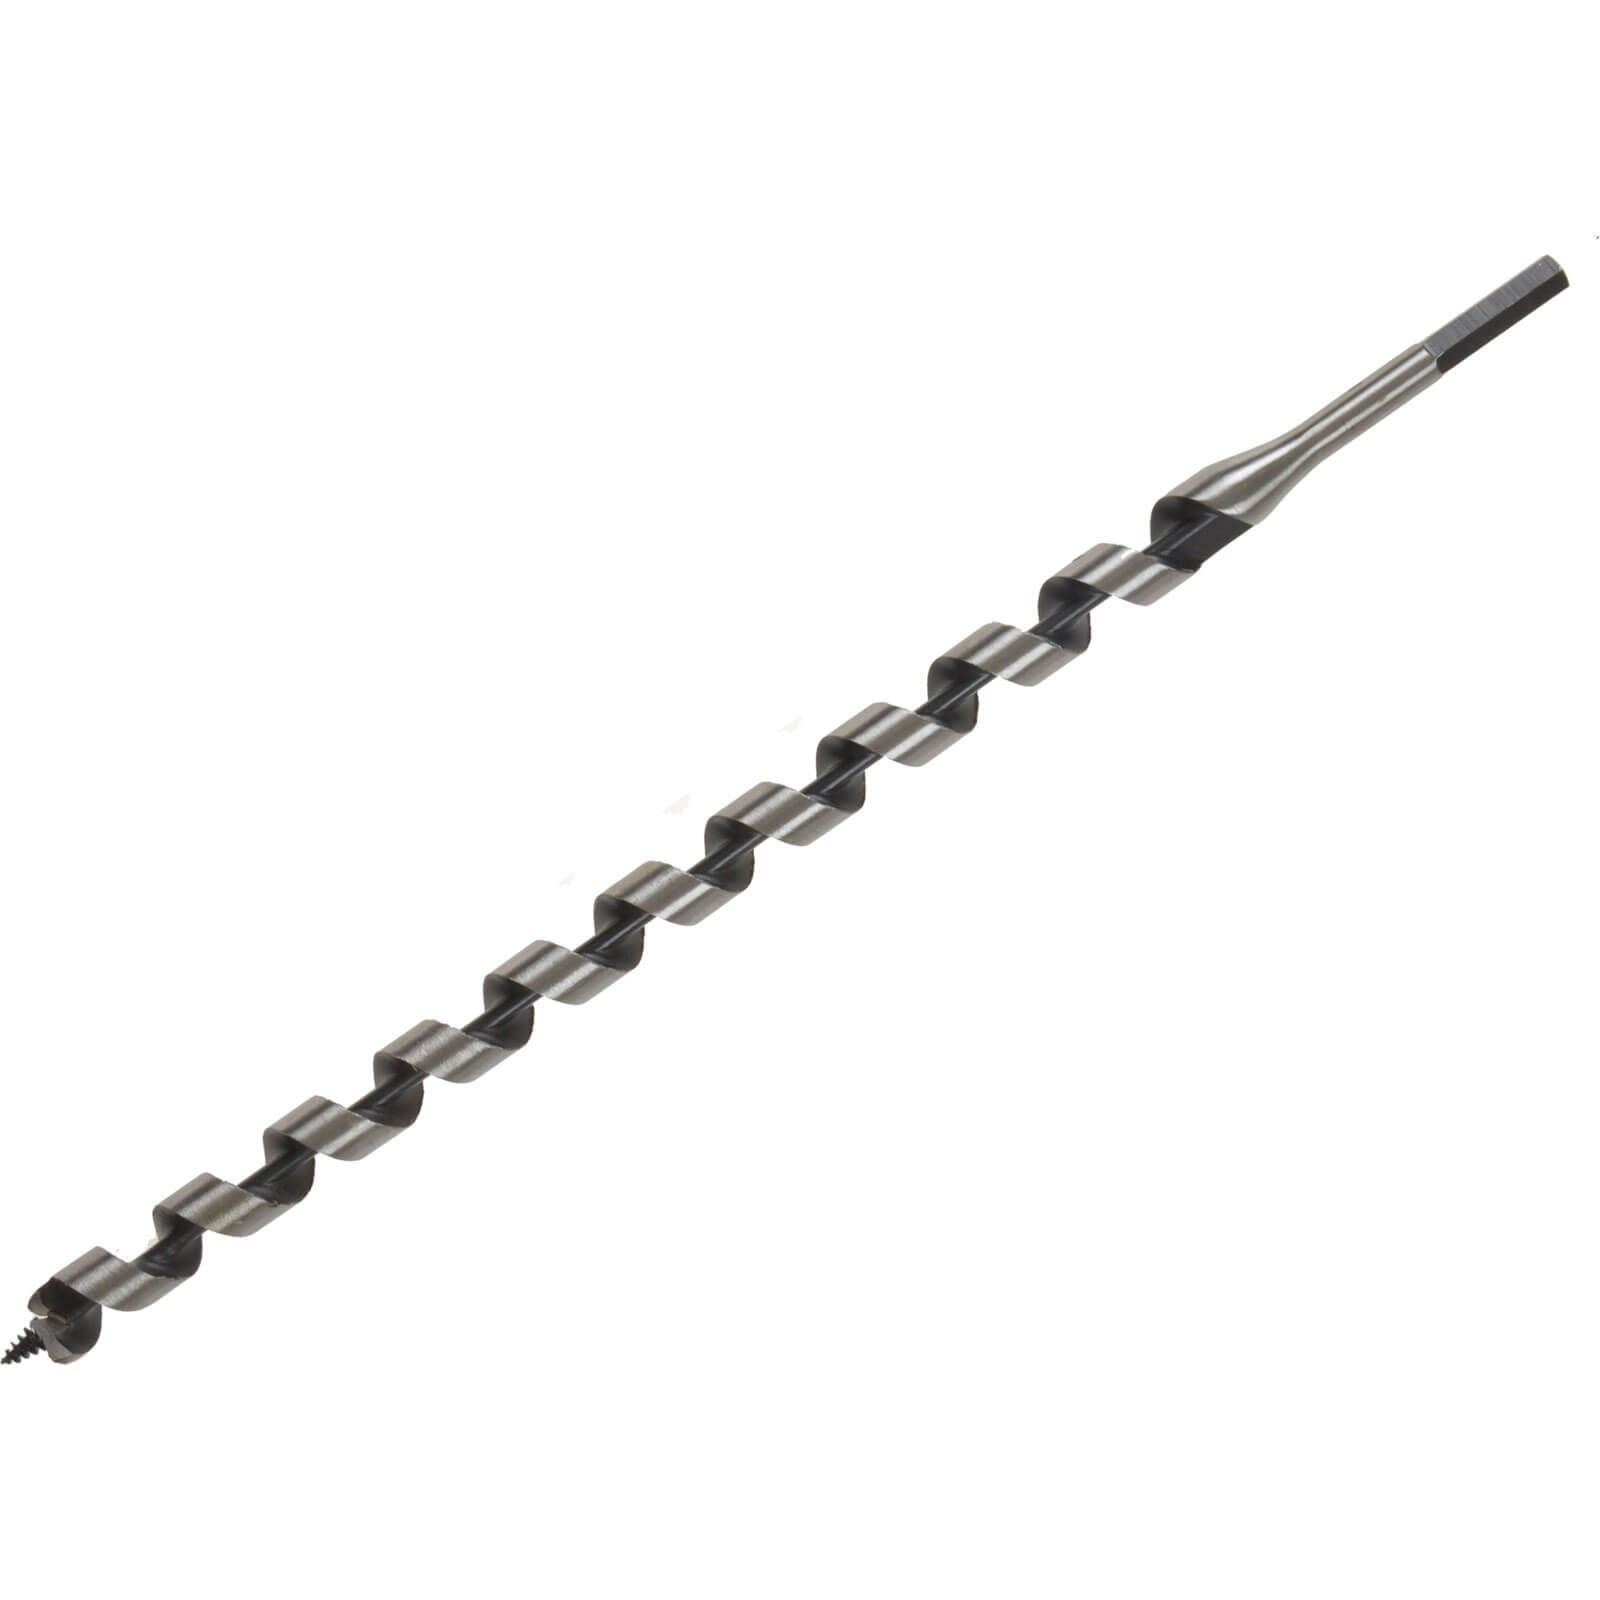 Image of Irwin Wood Auger Drill Bit 30mm 400mm